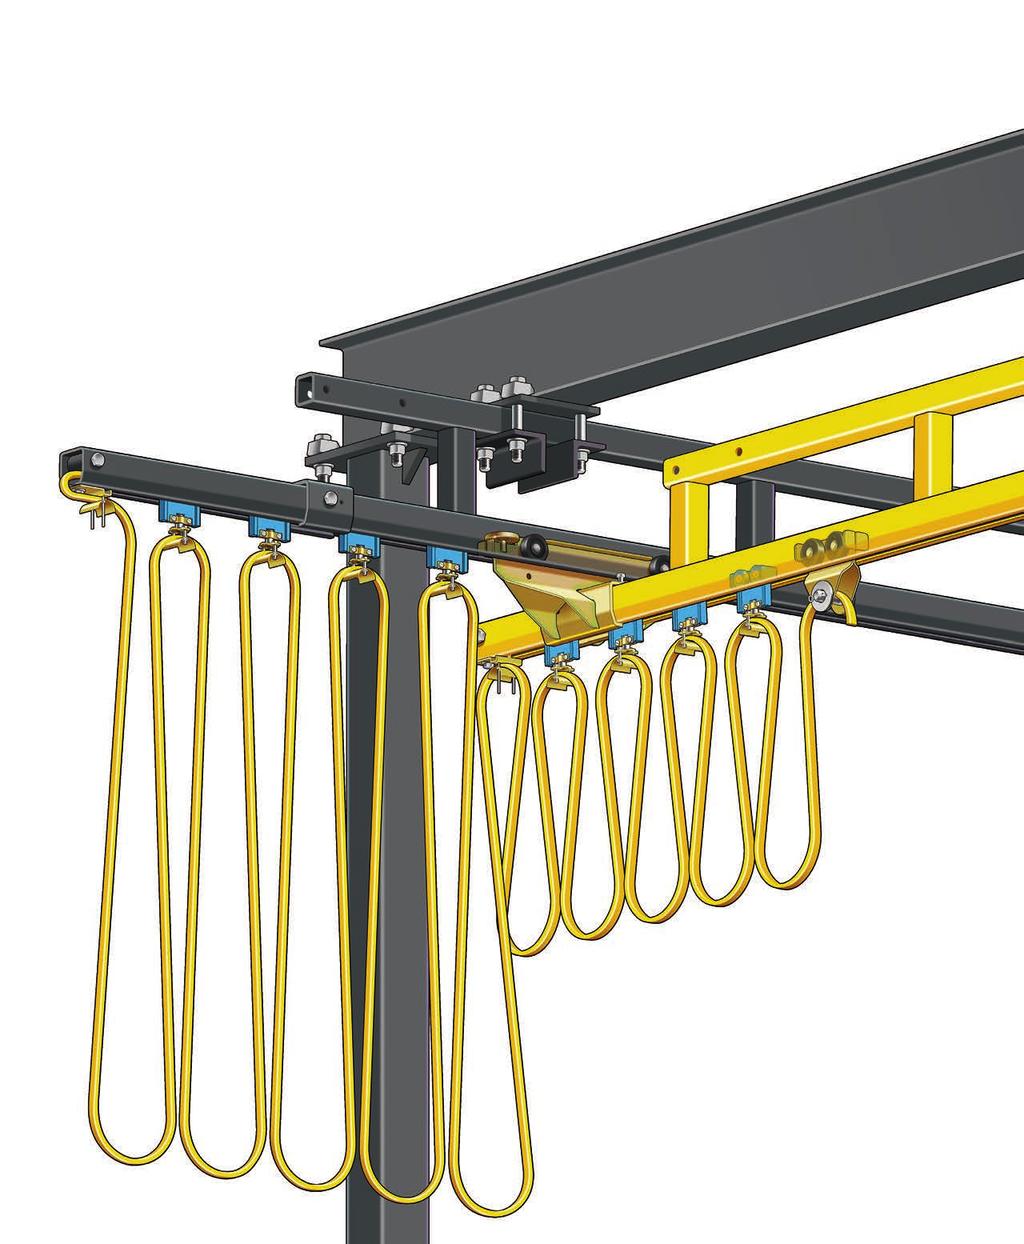 Hanger Assemblies: A For Spanco Ceiling-Mounted Systems, threaded rod hangers are